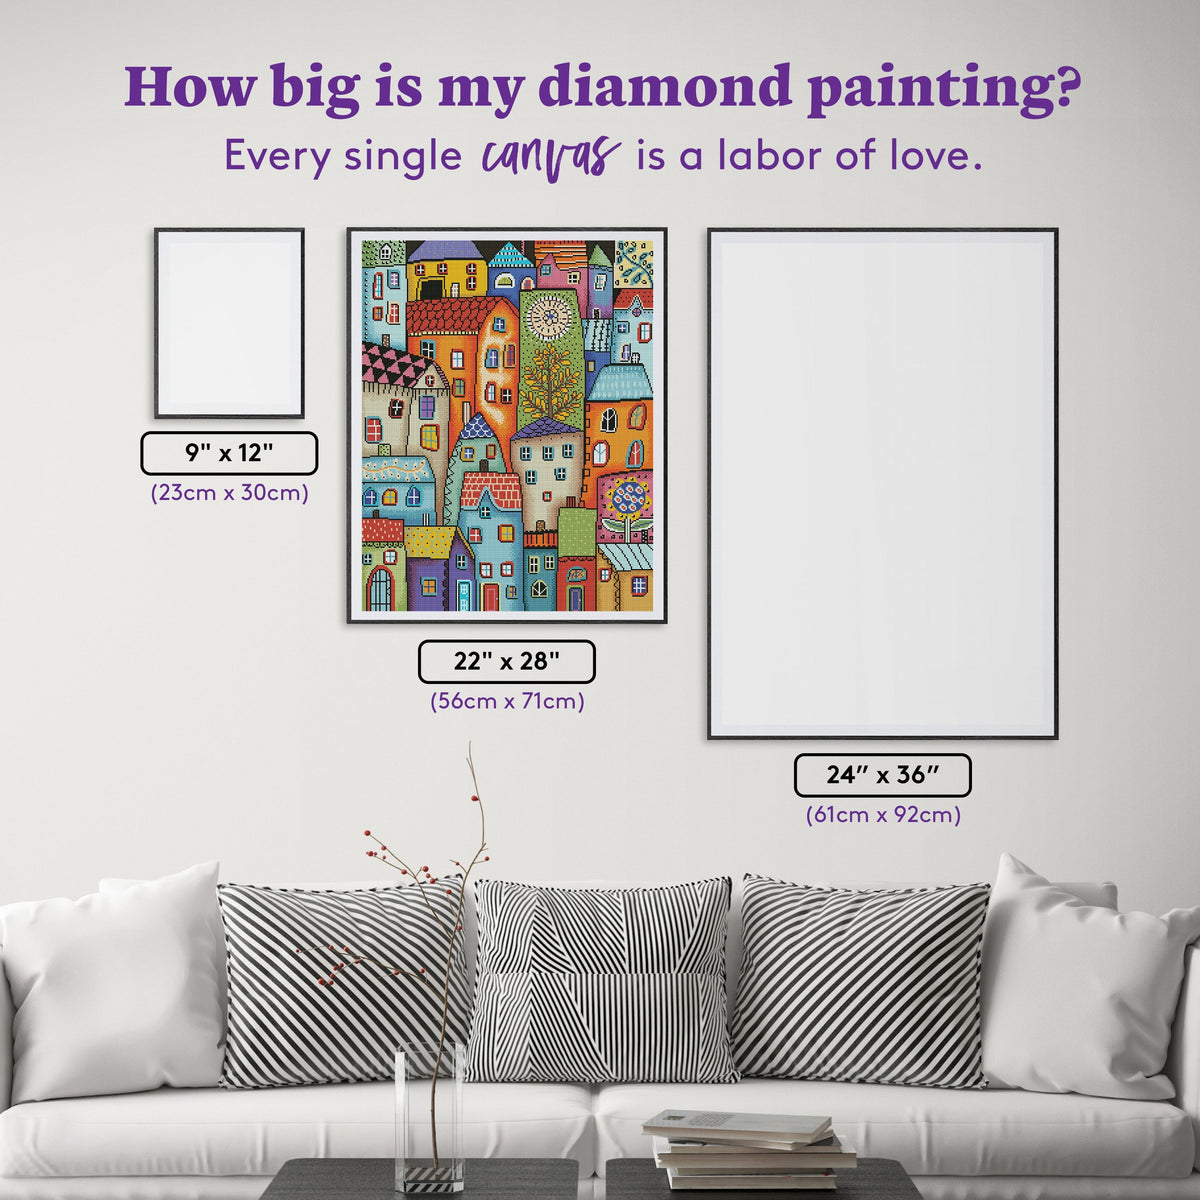 Diamond Painting City Digs 22" x 28" (56cm x 71cm) / Square With 44 Colors Including 6 ABs / 62,101